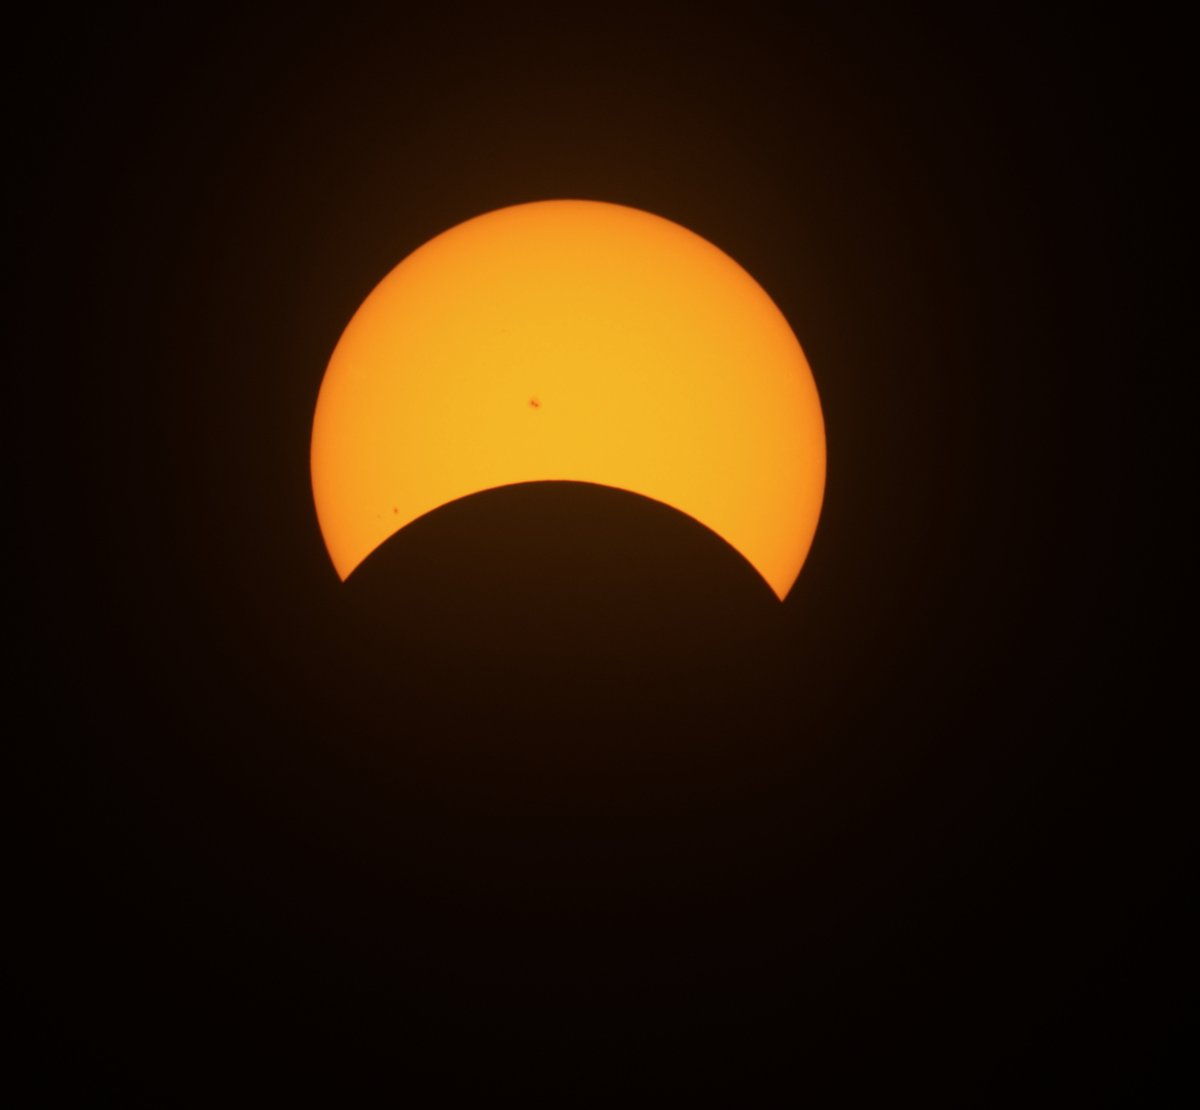 Today's partial #Eclipse2024, complete with sunspots from Nothern California. @NikonUSA #SolarEclipse #SolarEclipse2024